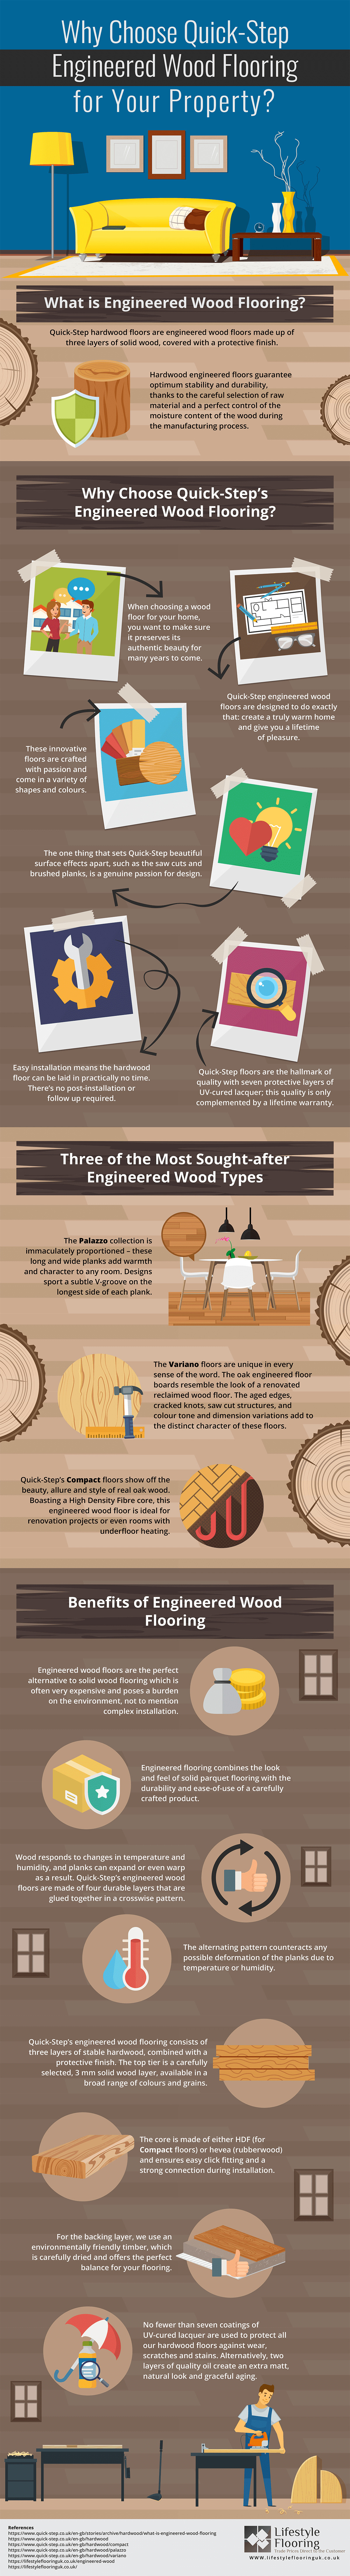 14 Fantastic Engineered Hardwood Flooring Vs solid Hardwood 2024 free download engineered hardwood flooring vs solid hardwood of why choose quick step engineered wood flooring csw within if youre looking to find out more information this infographic below from lifestyl